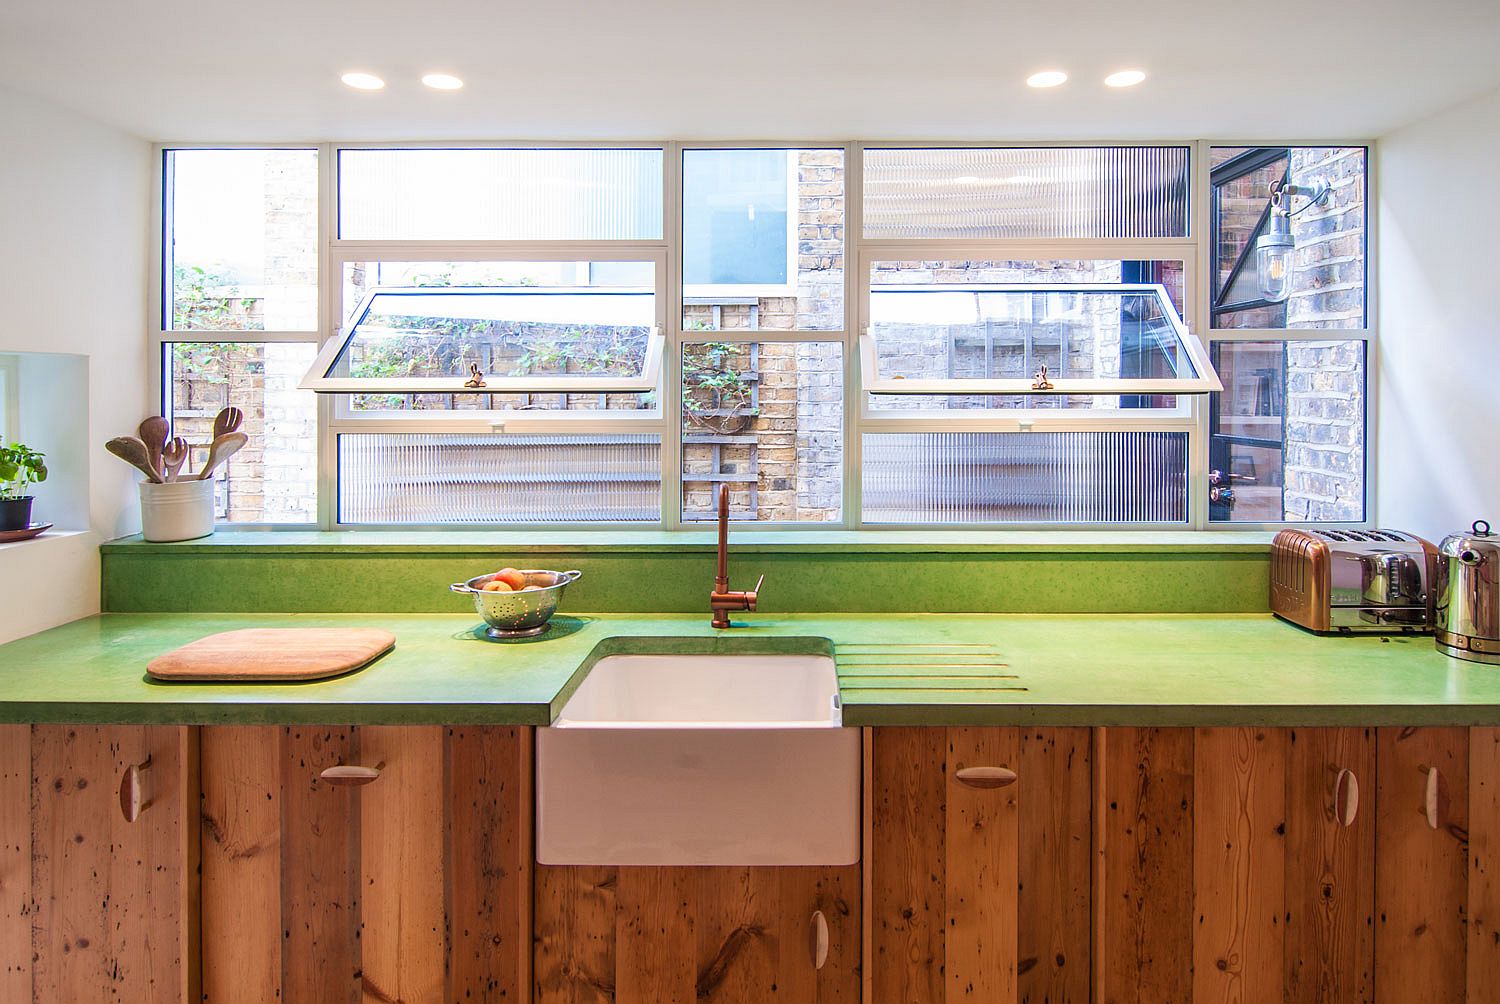 Custom green concrete countertop coupled with reclaimed wood cabinets in the kitchen